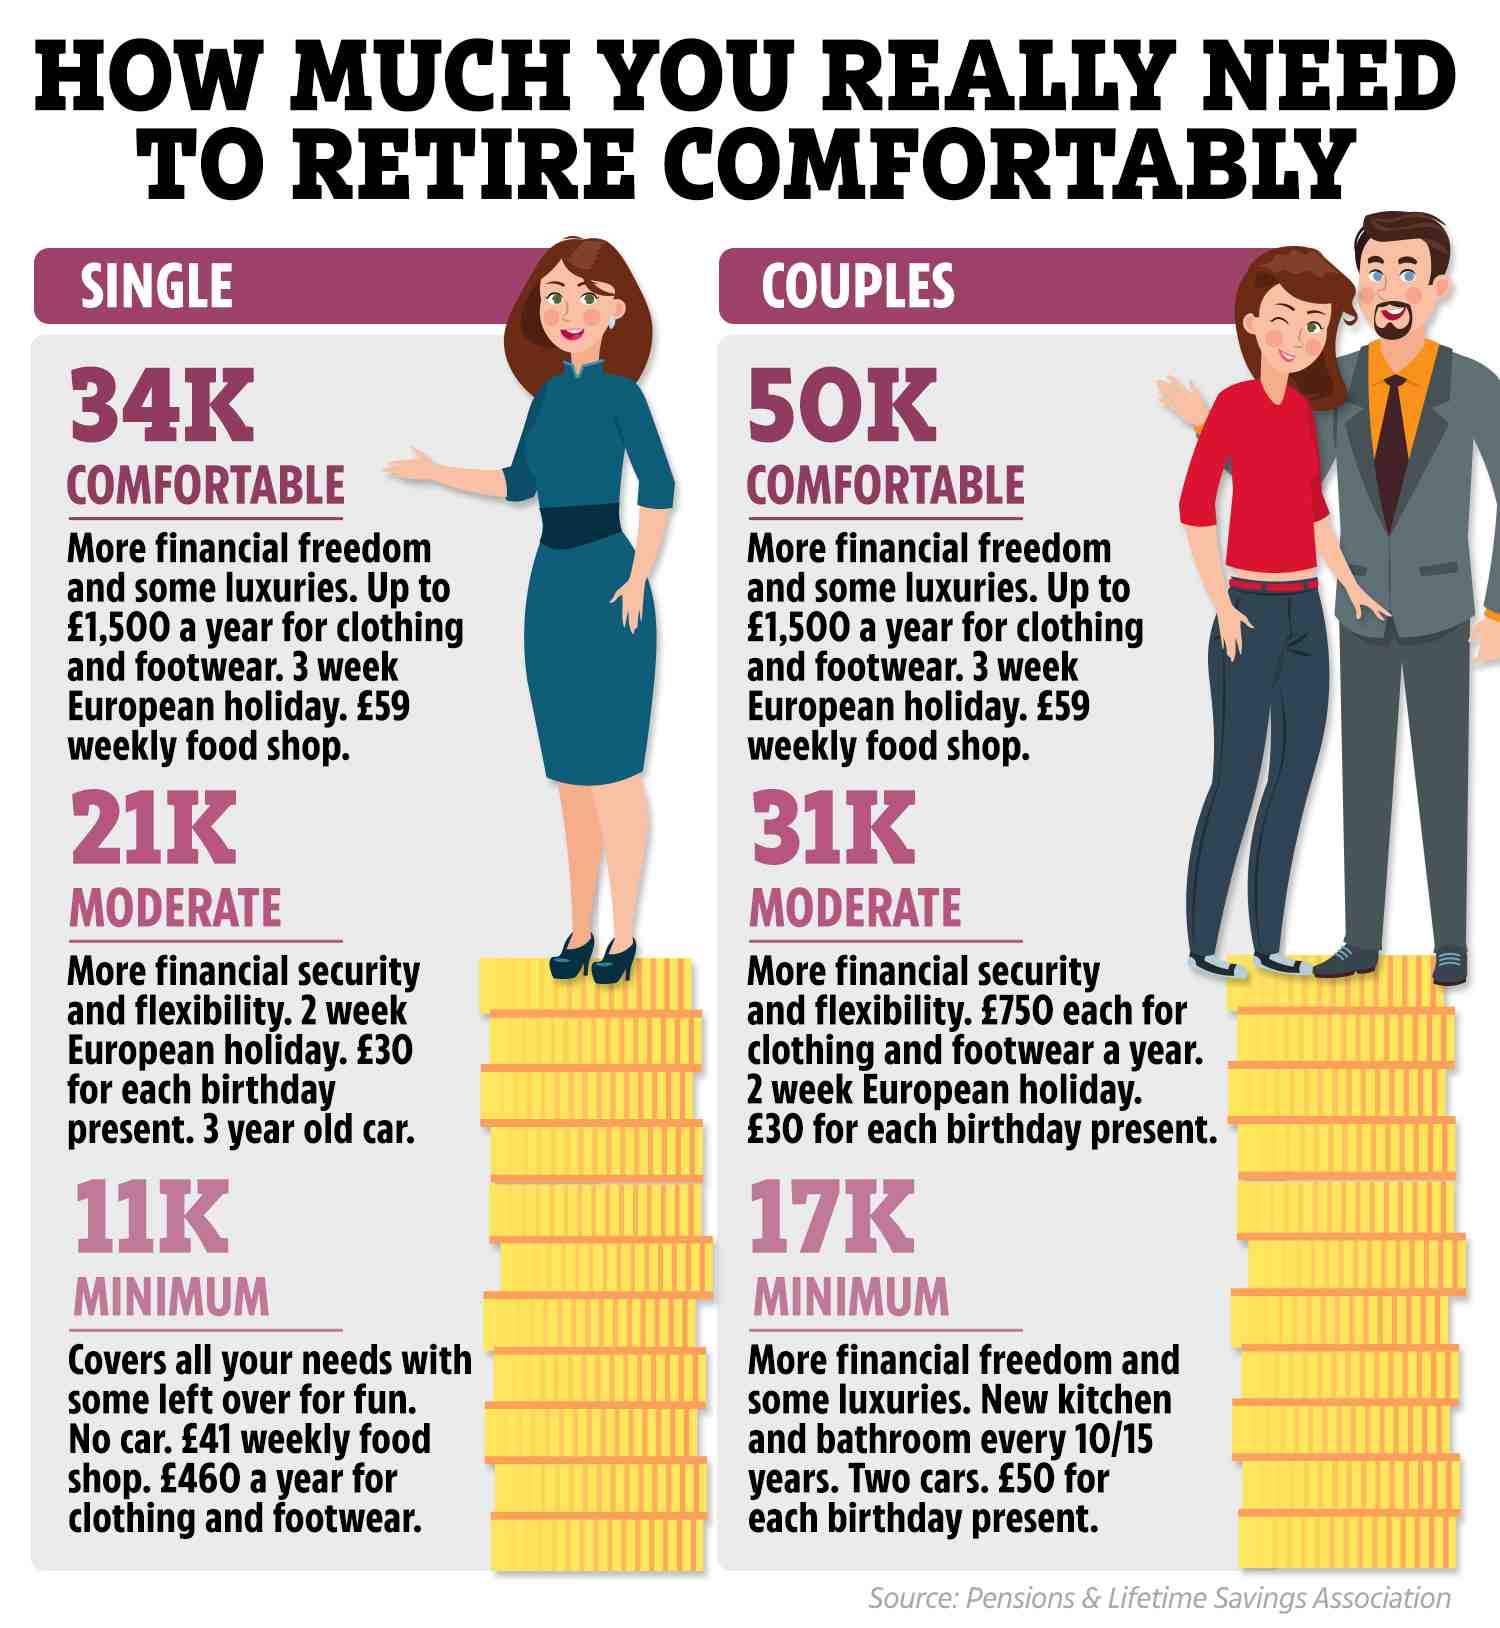 how-much-money-do-you-need-to-live-comfortably-uk-retirement-news-daily